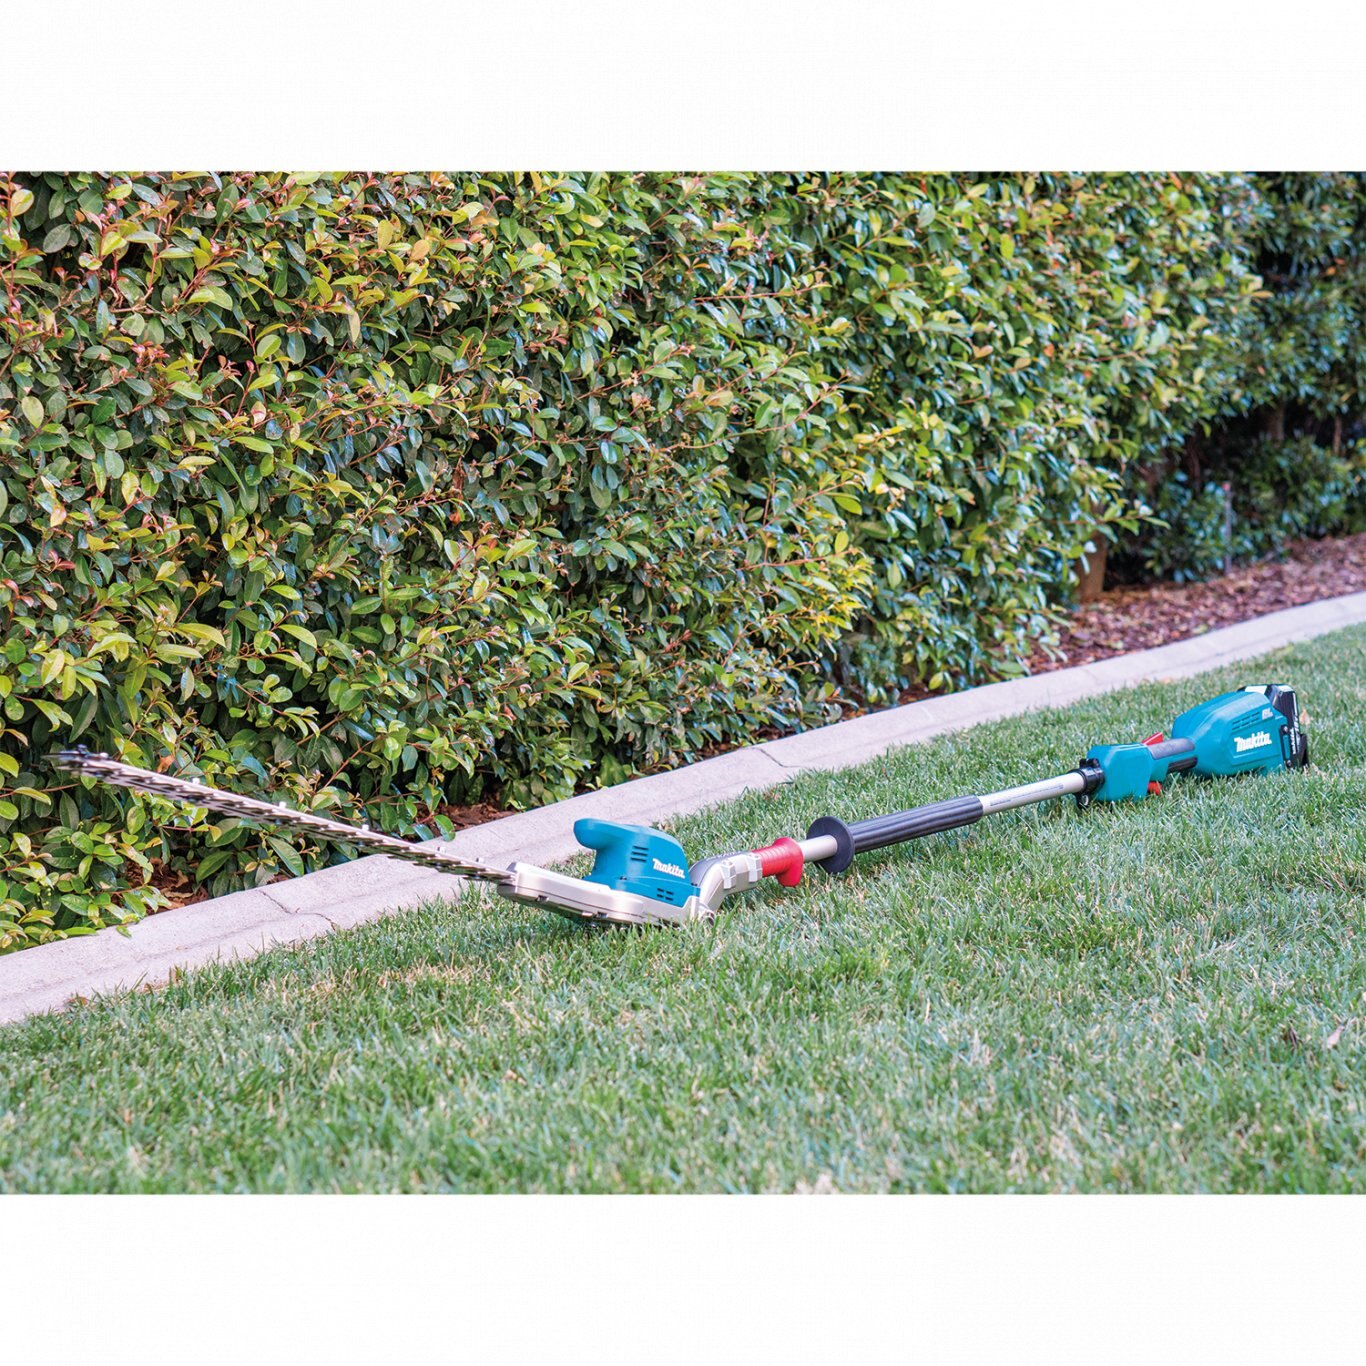 Makita 18V LXT® Lithium?Ion Brushless Cordless 24 Pole Hedge Trimmer, Tool Only